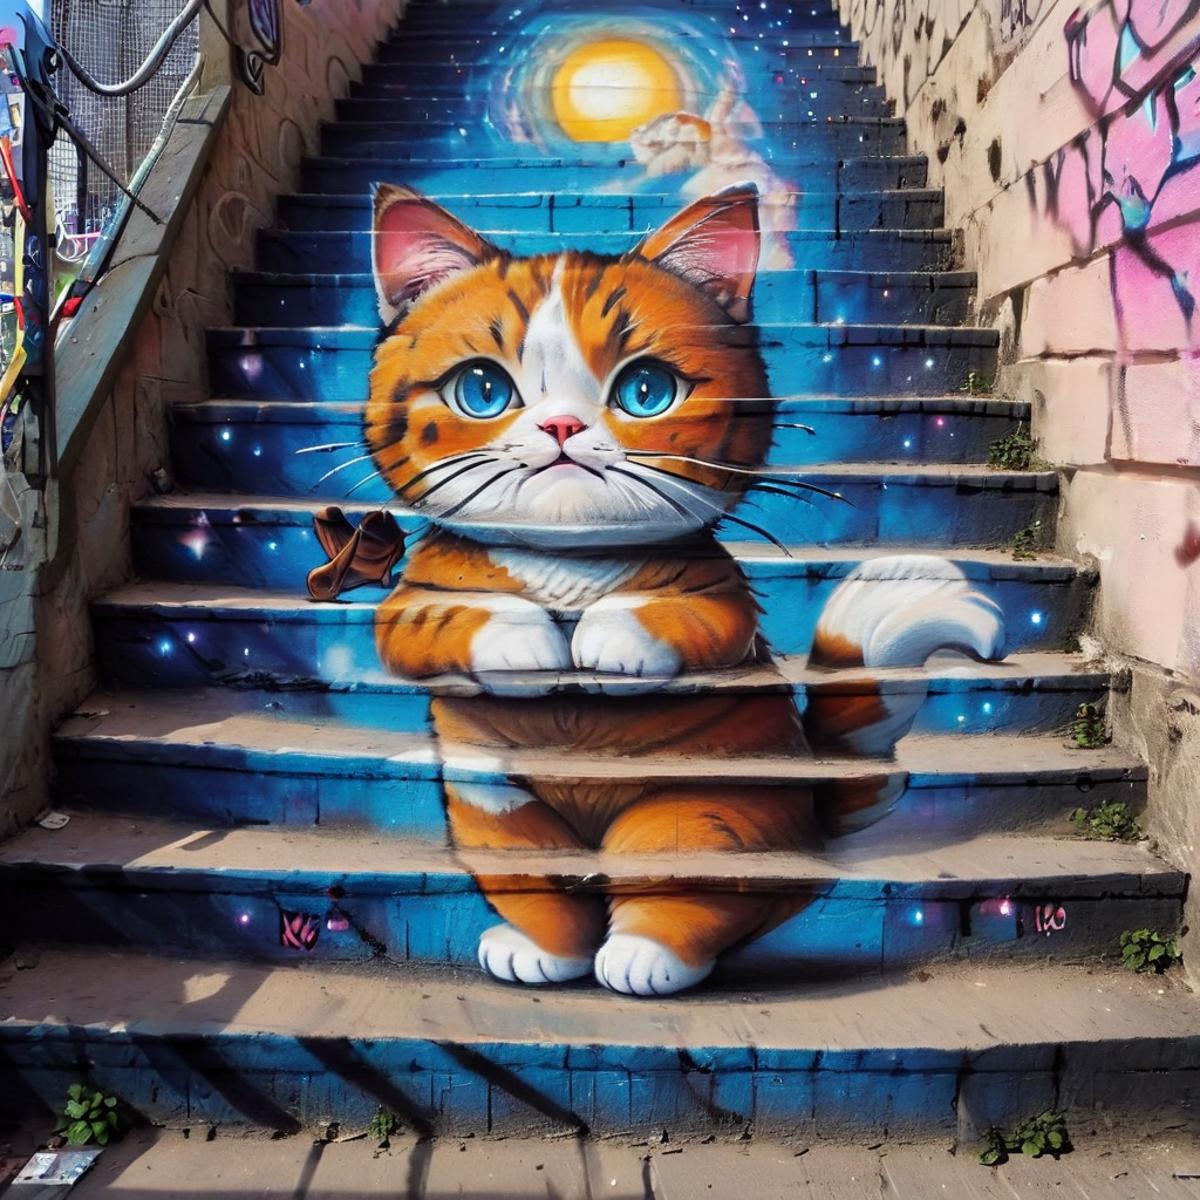 A cat painted on a staircase.